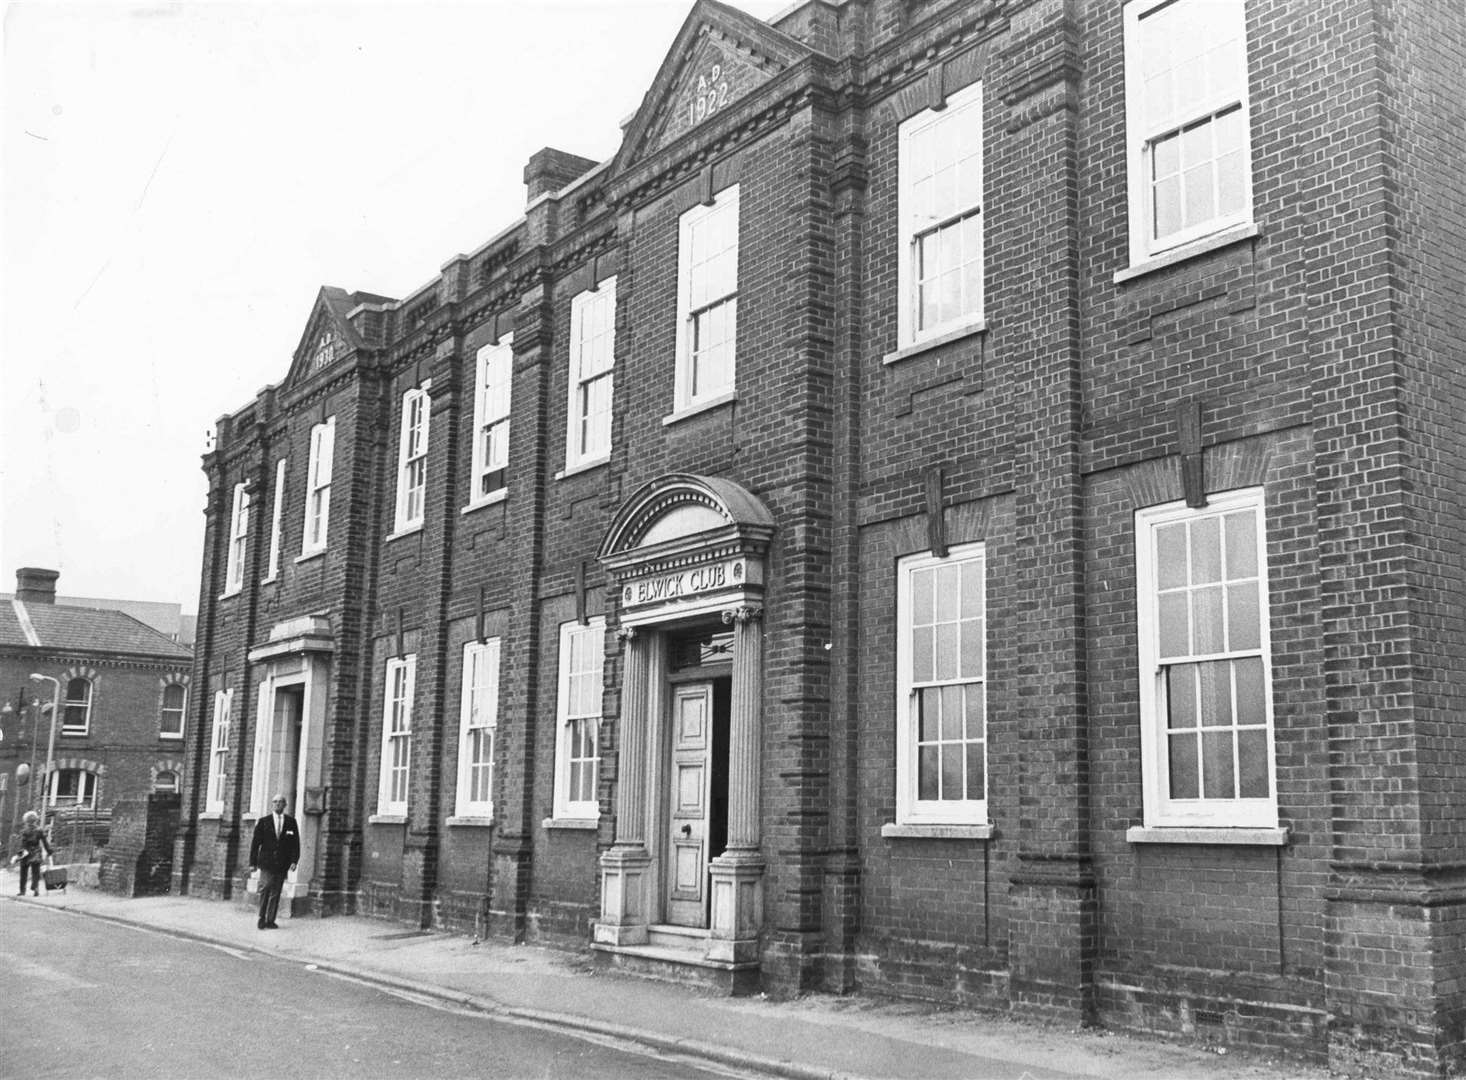 Ashford's Elwick Club in Tufton Street closed in 1973 to make way for the first shopping centre in that location. Picture: Images of Ashford by Mike Bennett